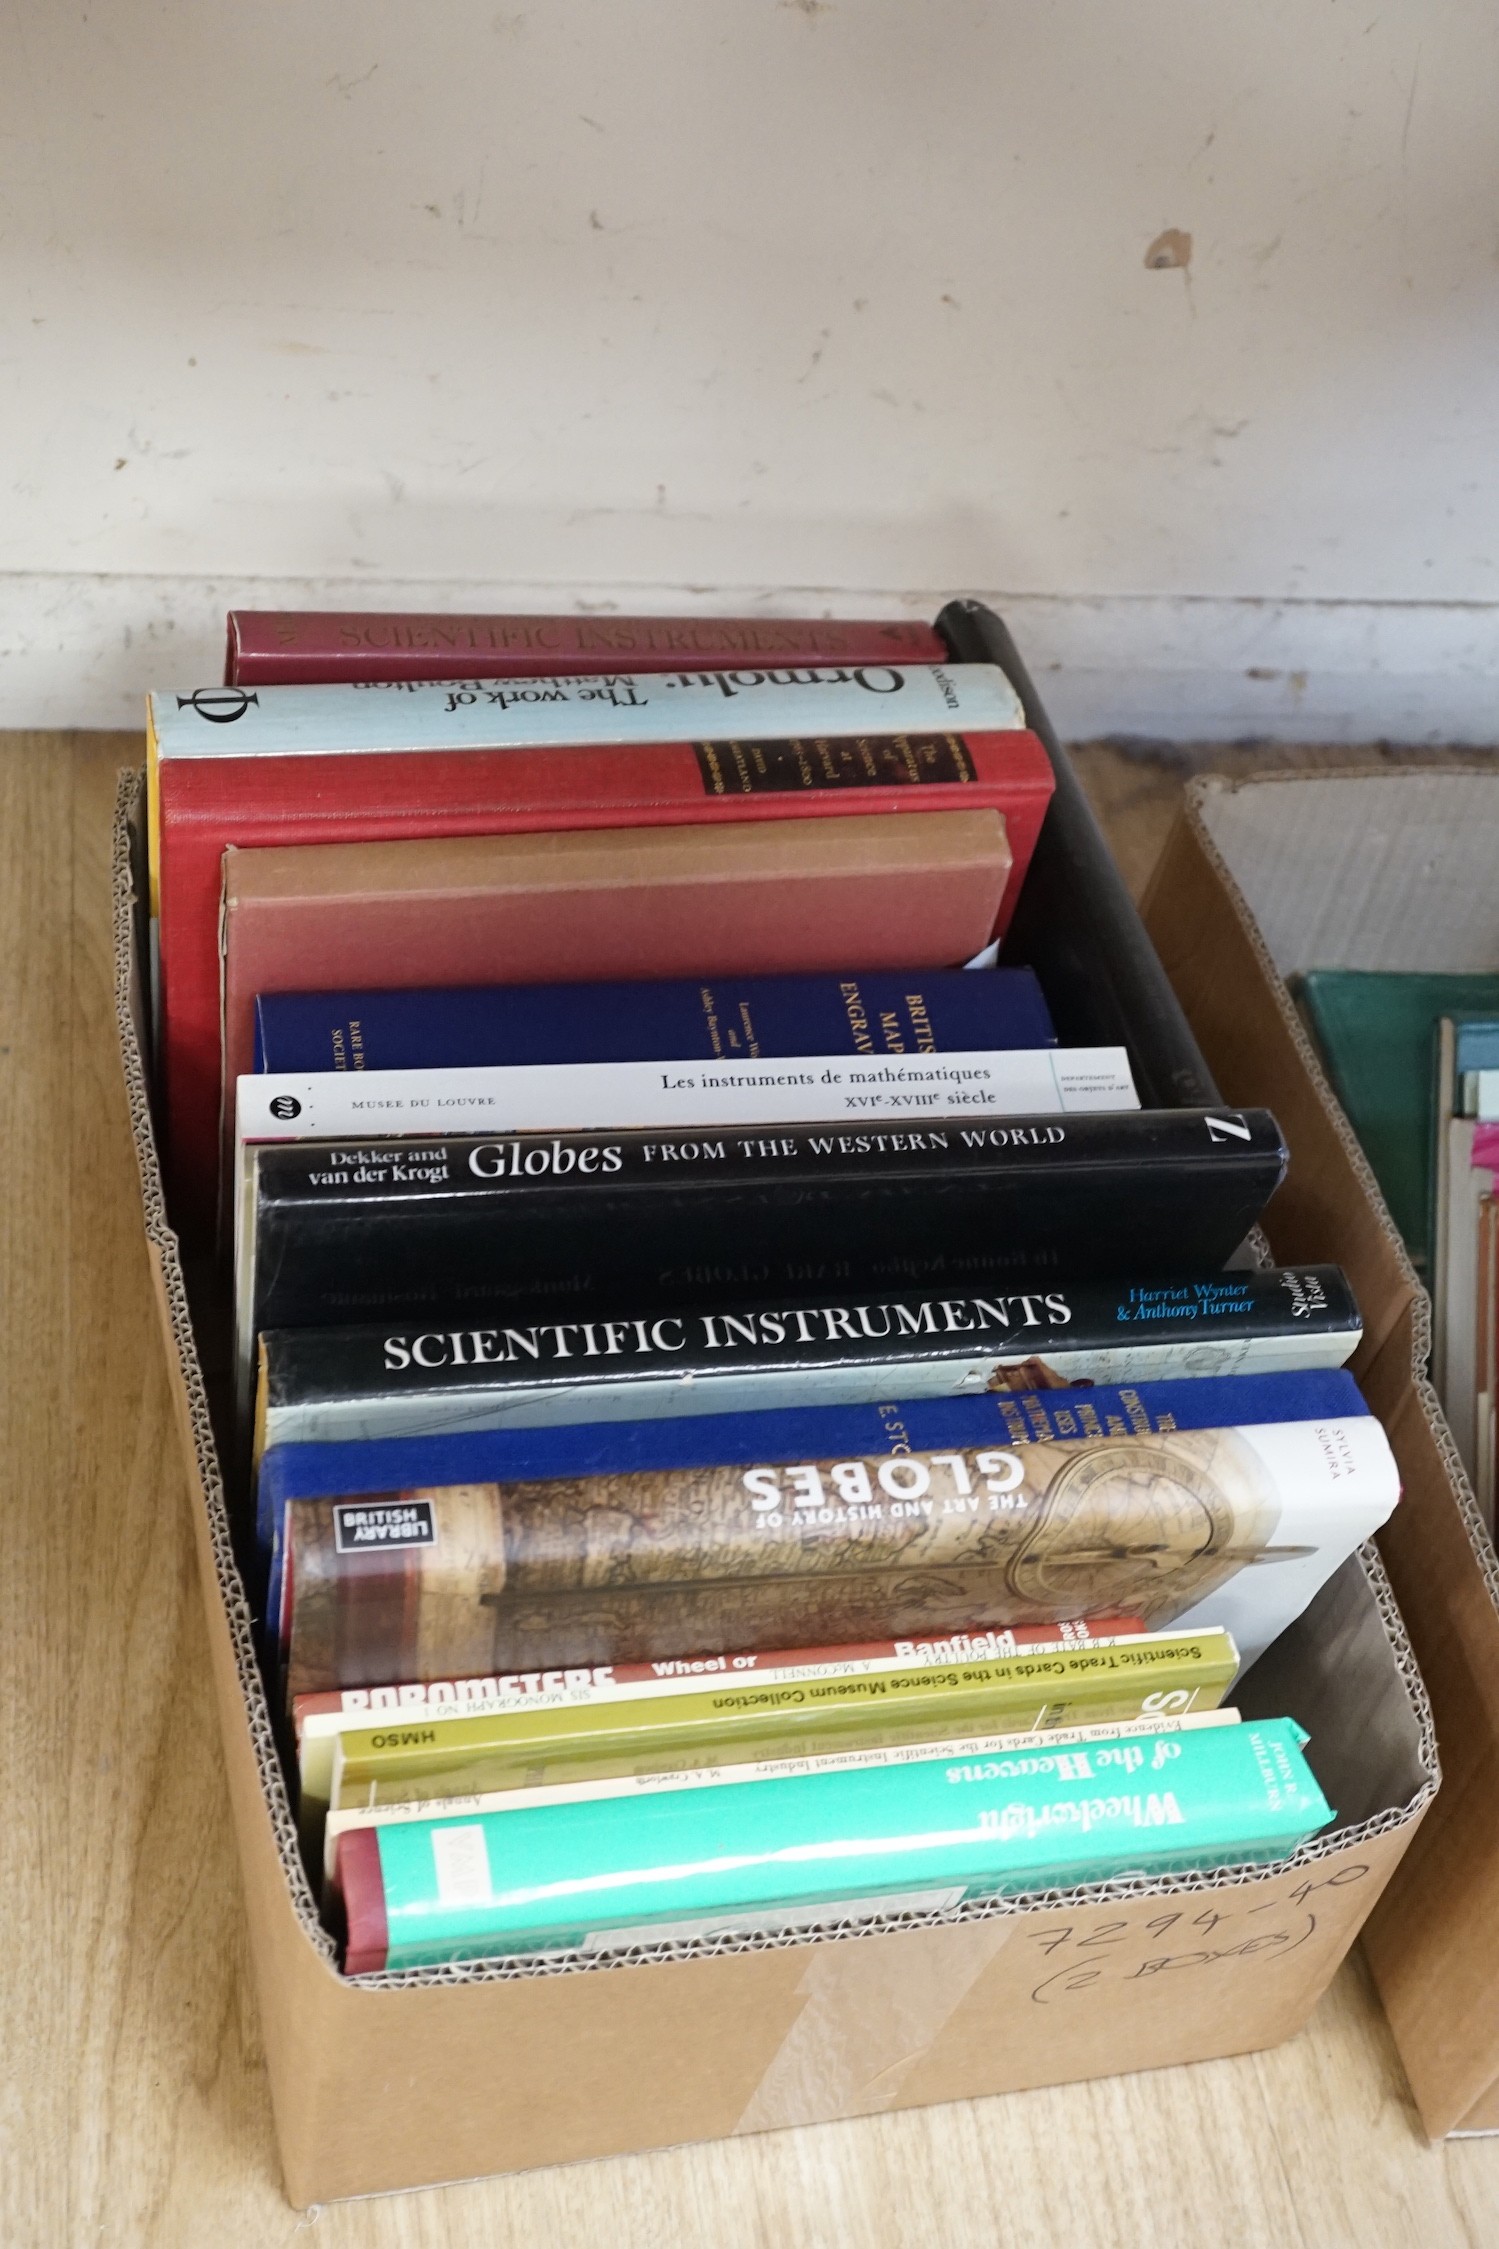 A selection of books on globes and scientific instruments to include; Decker, Elly and Van Der Krogt, Peter, Globes From The Western World, Trevor Philip & Sons Ltd, 1993; Wynter, Harriet and Turner, Anthony, Scientific